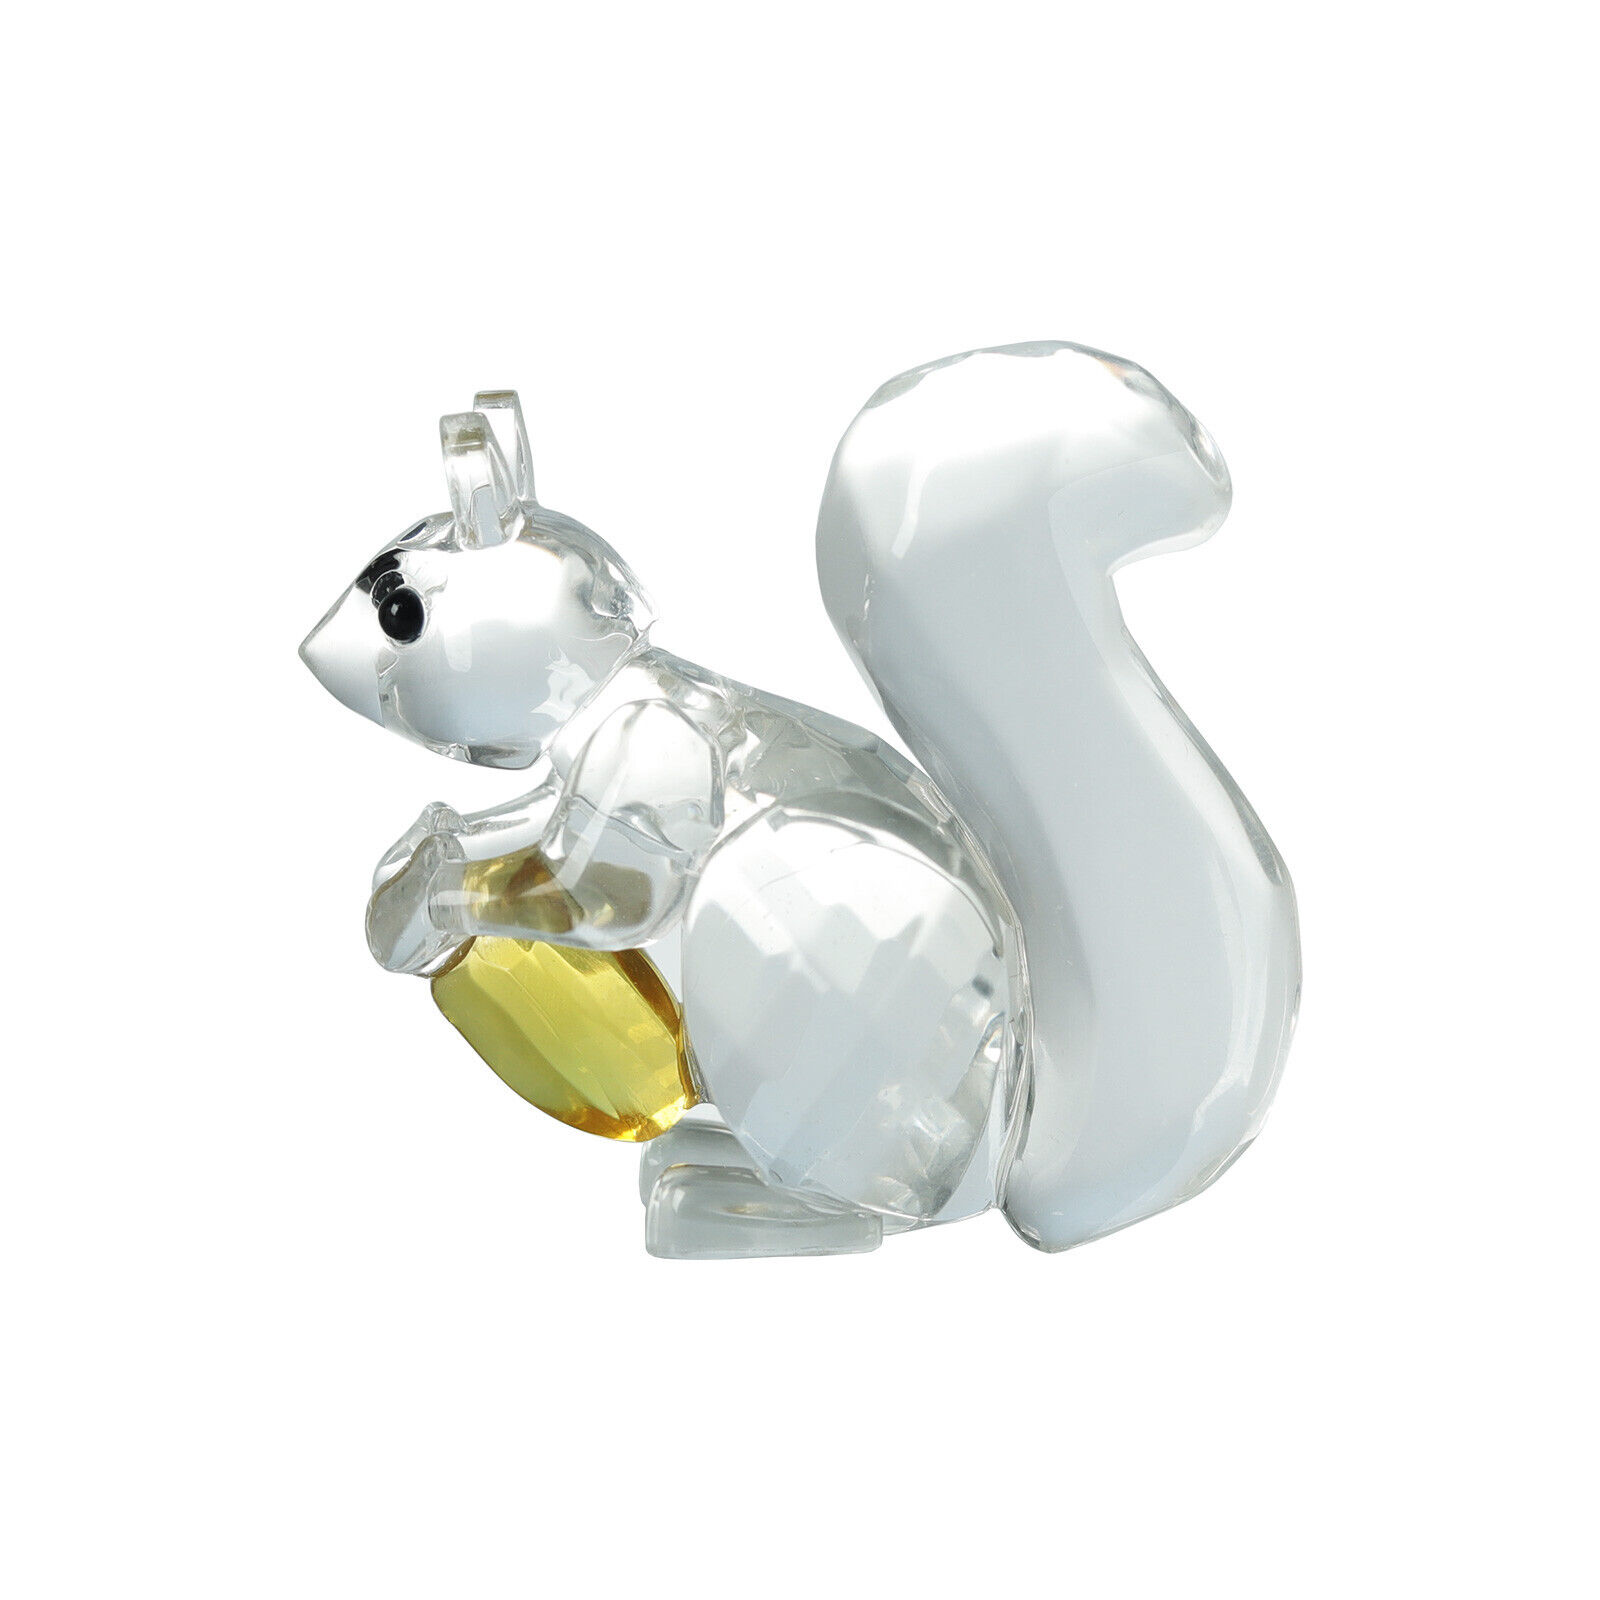 Crystal Squirrel Figurine Collectible Glass Animal Ornament Home Decor Gift